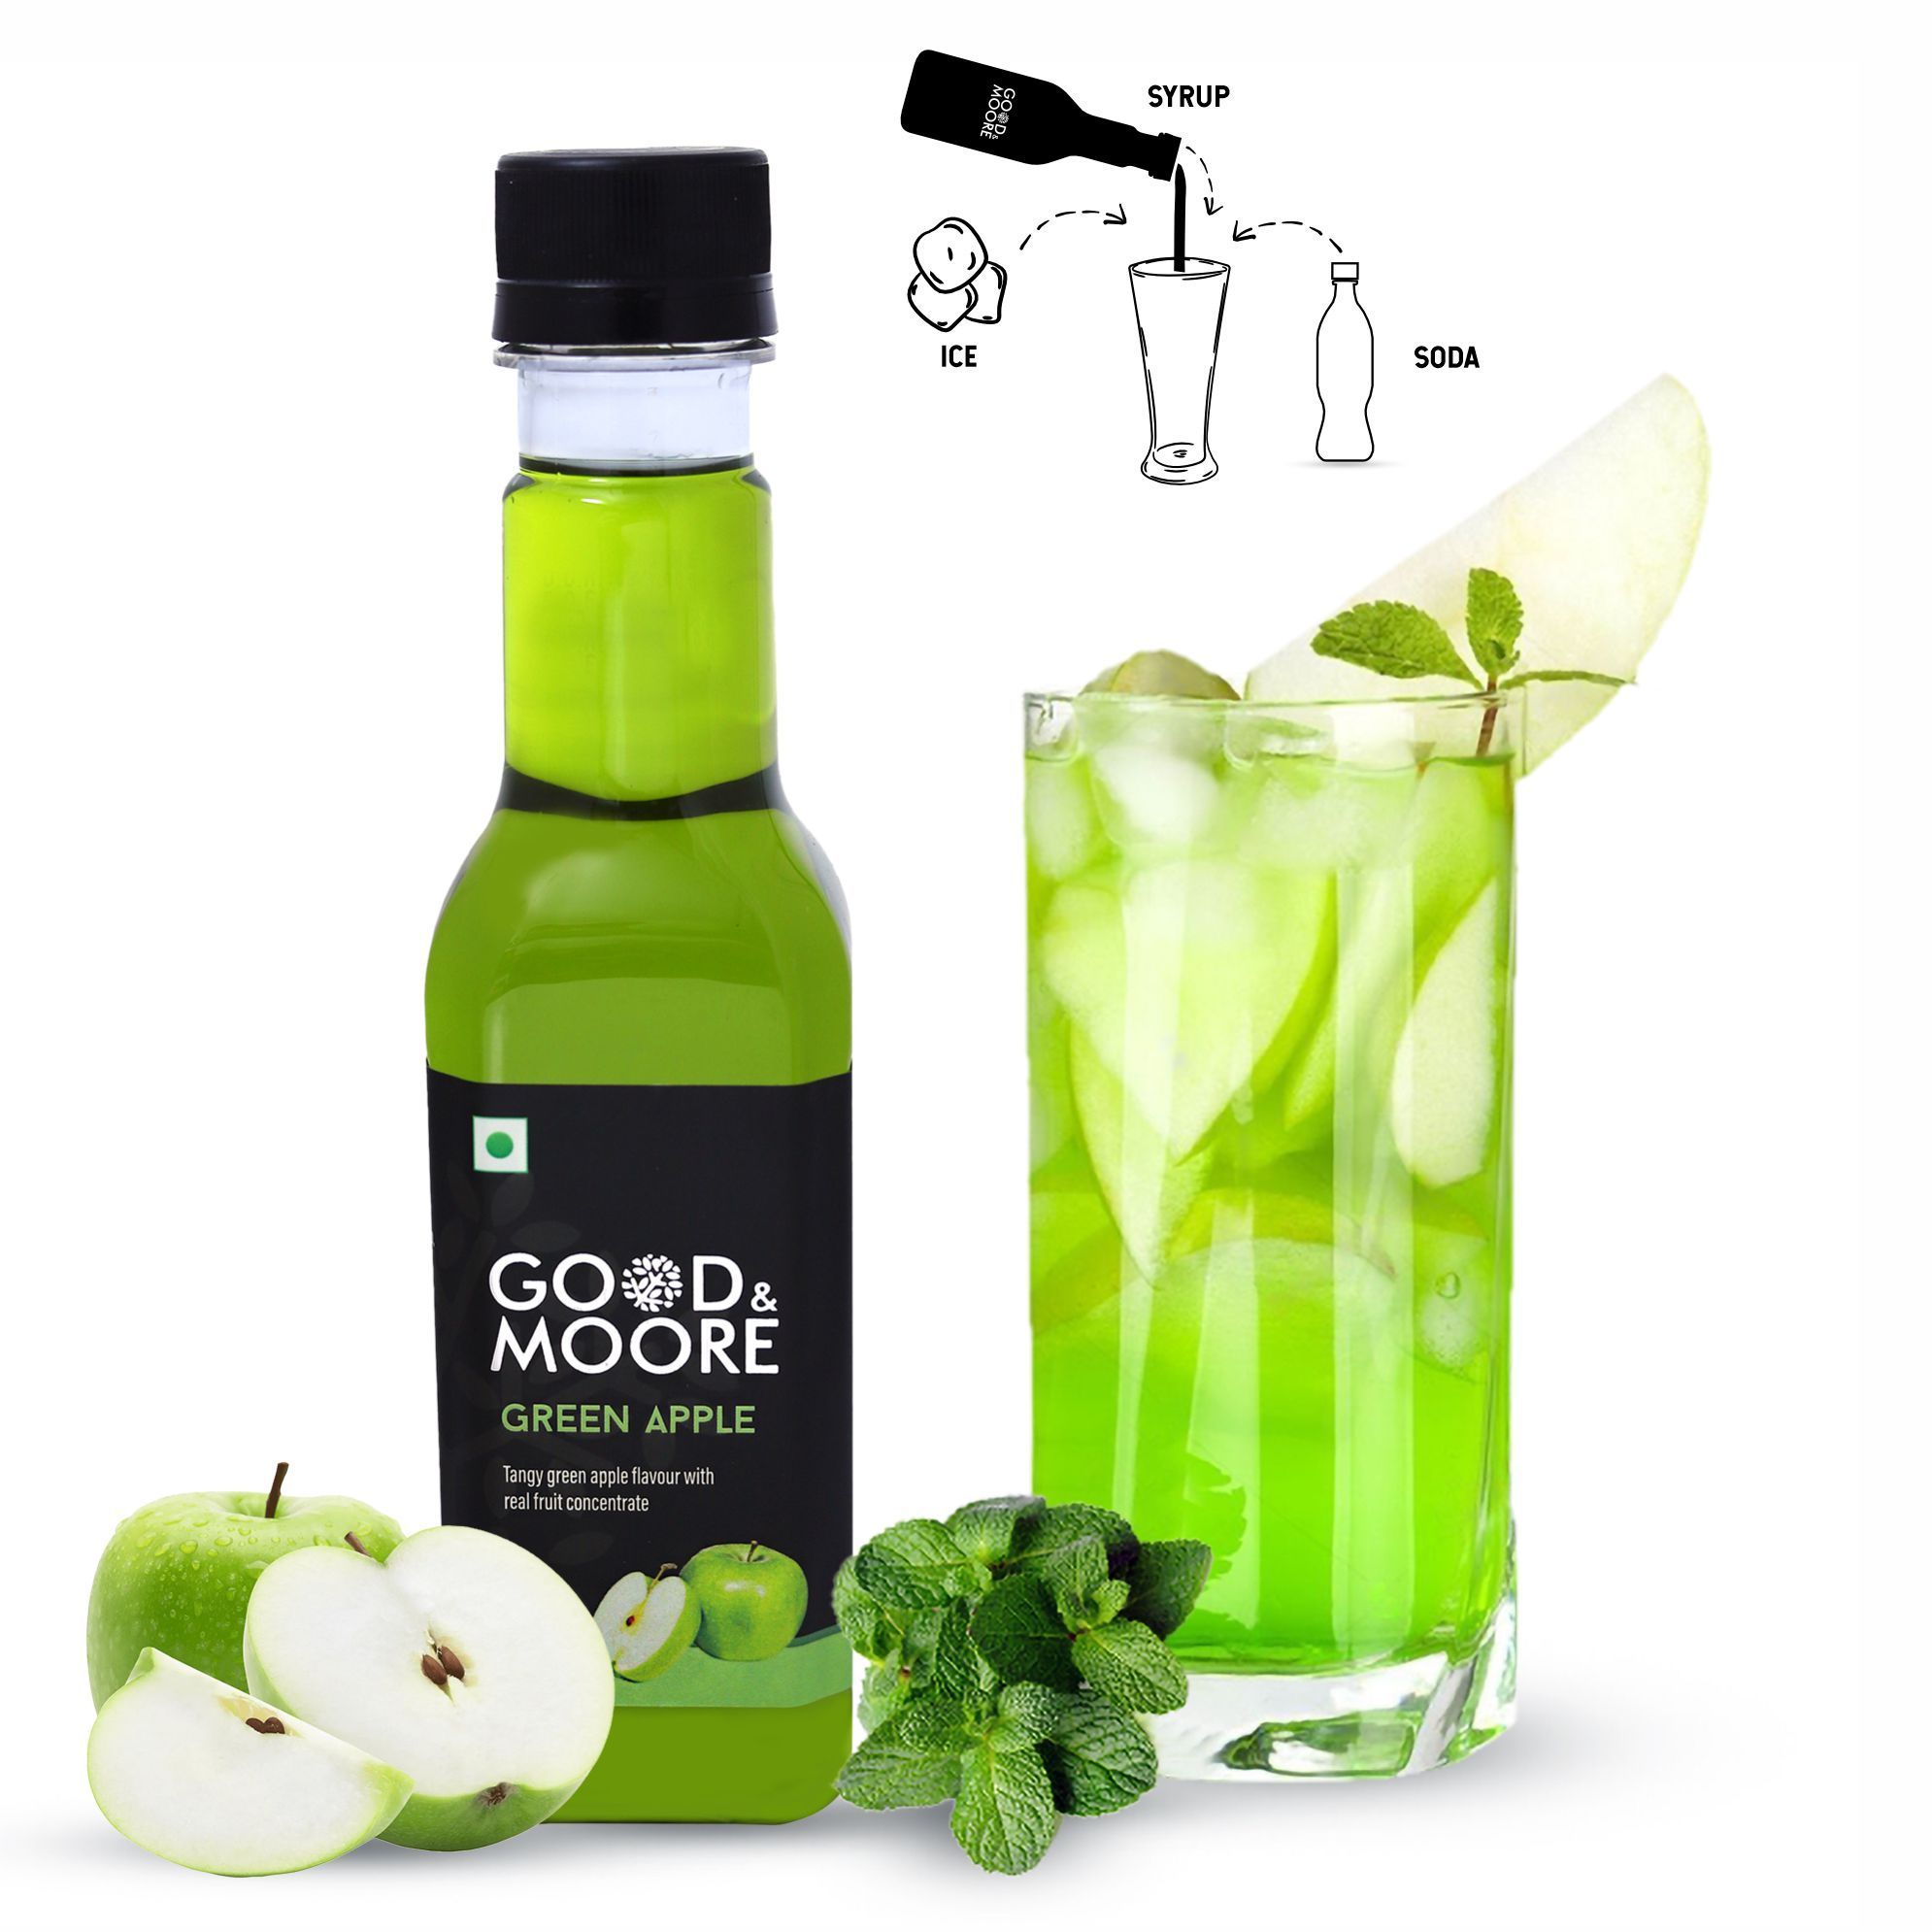 GOOD&MOORE Green Apple Syrup | 250ml | For Cocktail, Mocktail, Sodas, Ice-teas and more | Concentrated Syrup